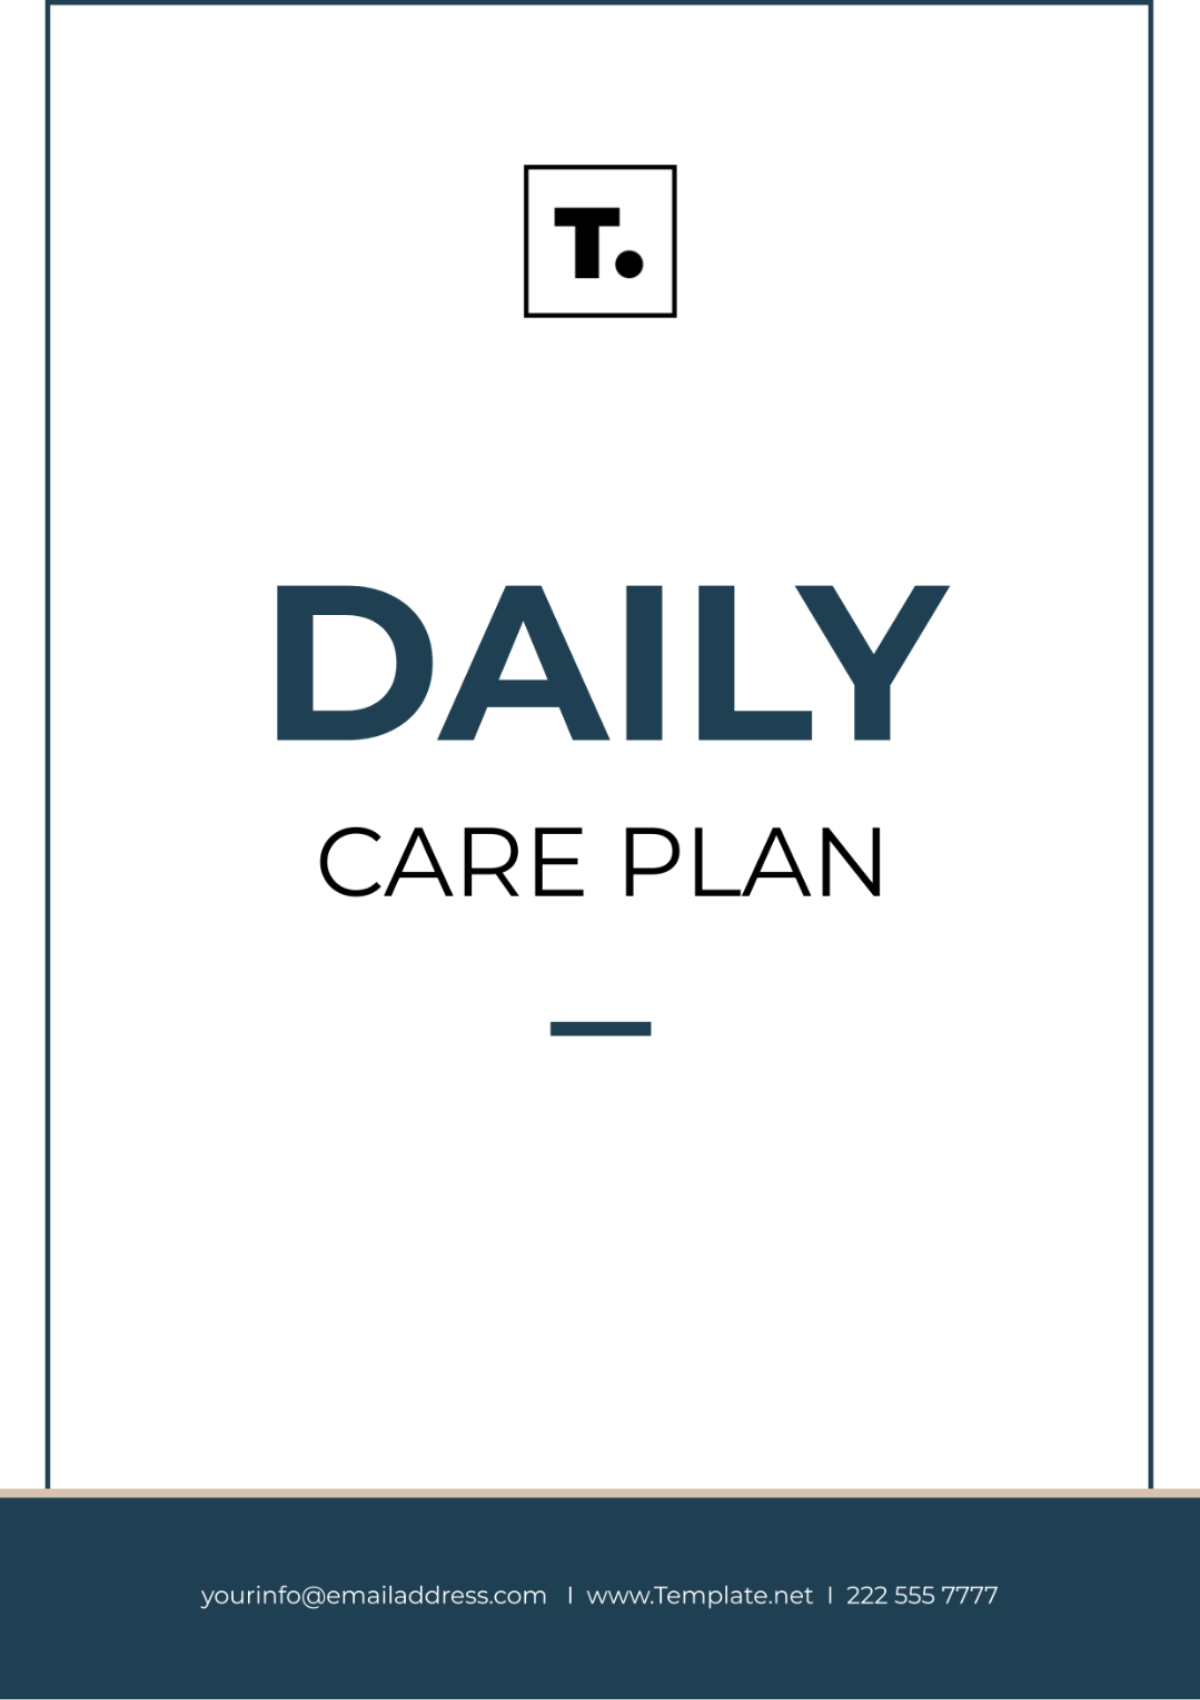 Daily Care Plan Template